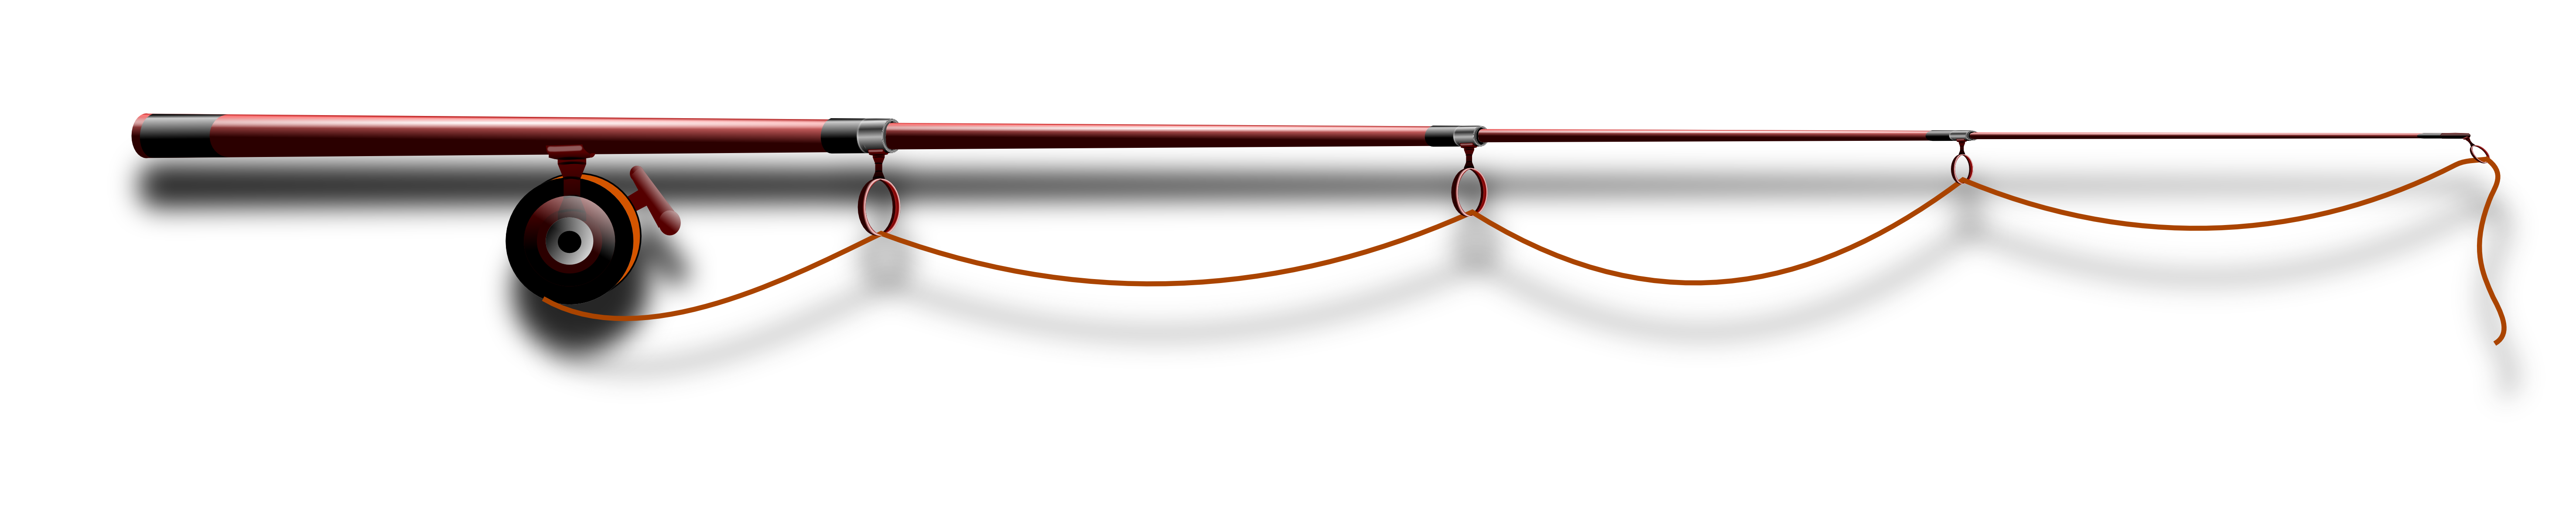 fishing rod by hatalar205 on Clipart library